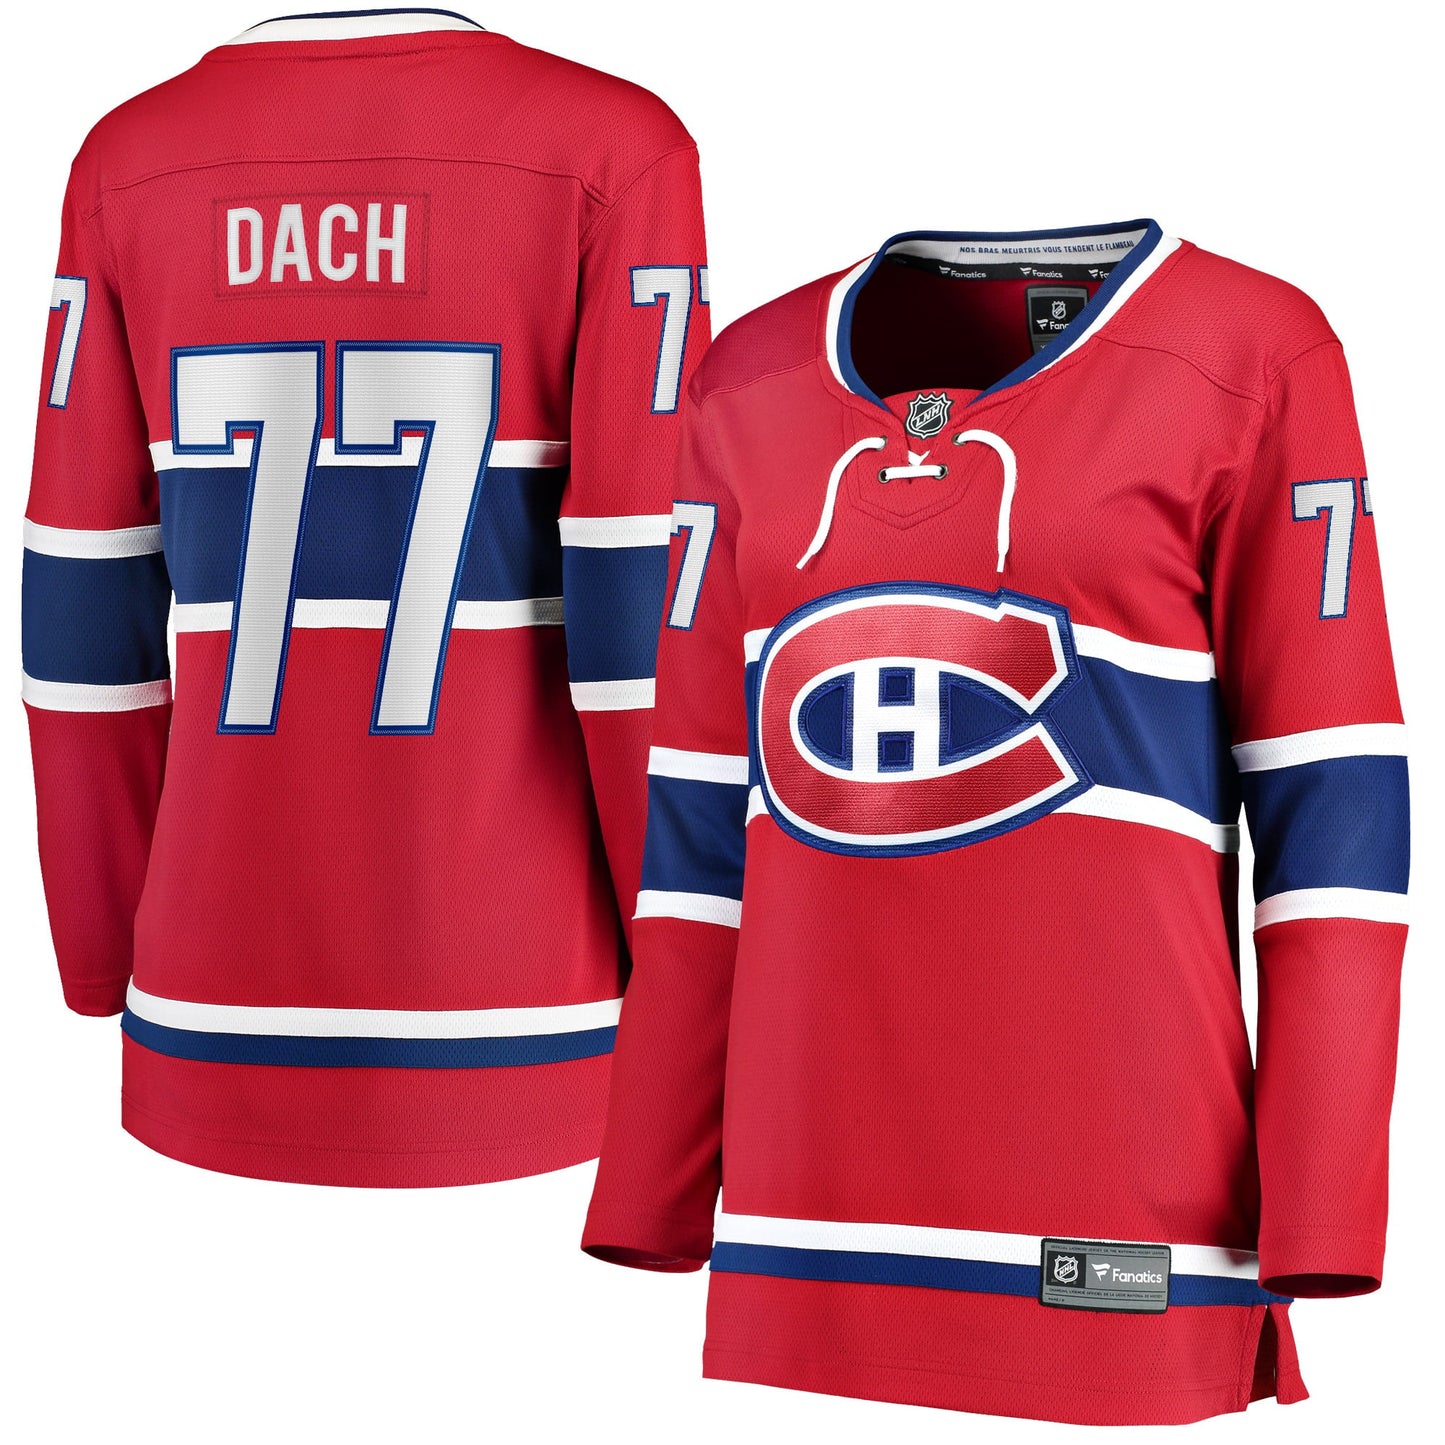 Women's Fanatics Branded Kirby Dach Red Montreal Canadiens Home Breakaway Player Jersey